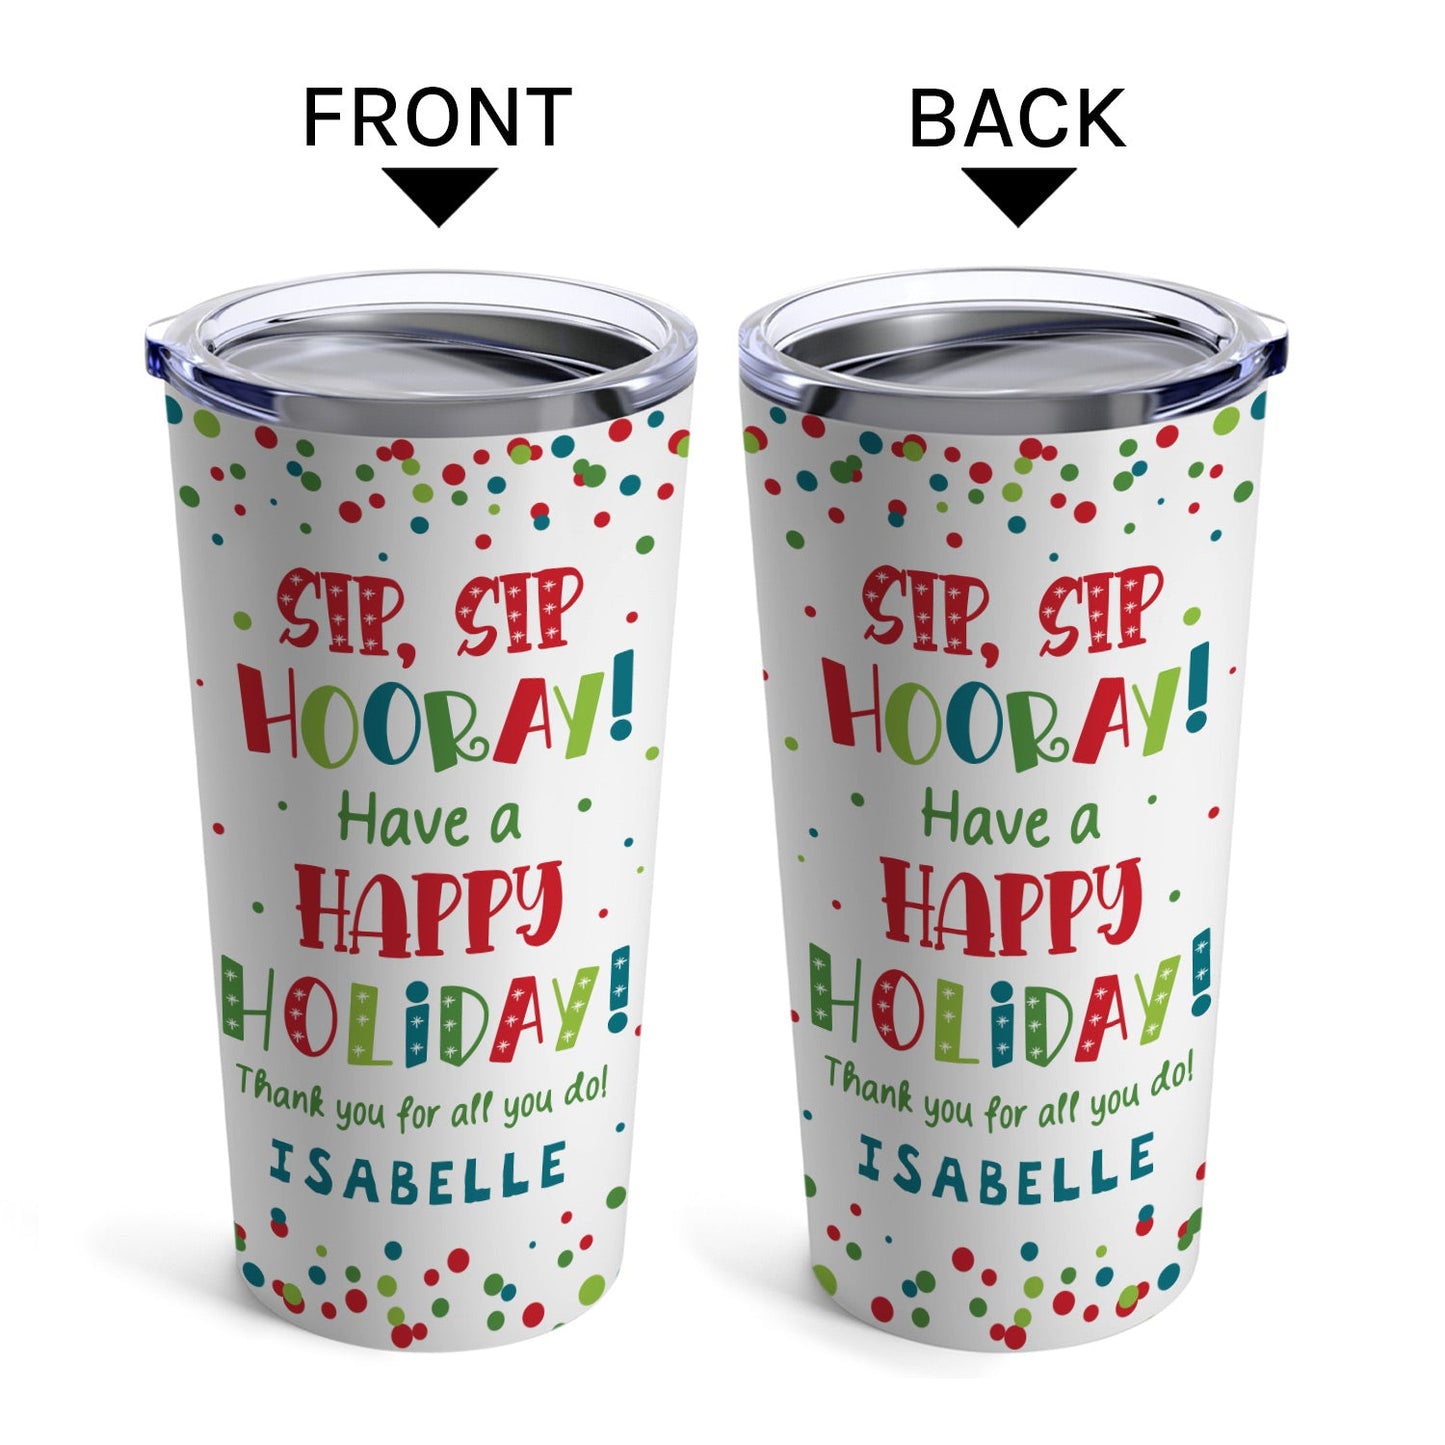 Sip, Sip Hooray. Have A Happy Holiday. - Personalized Christmas gift For Coworker or Employee - Custom Tumbler - MyMindfulGifts